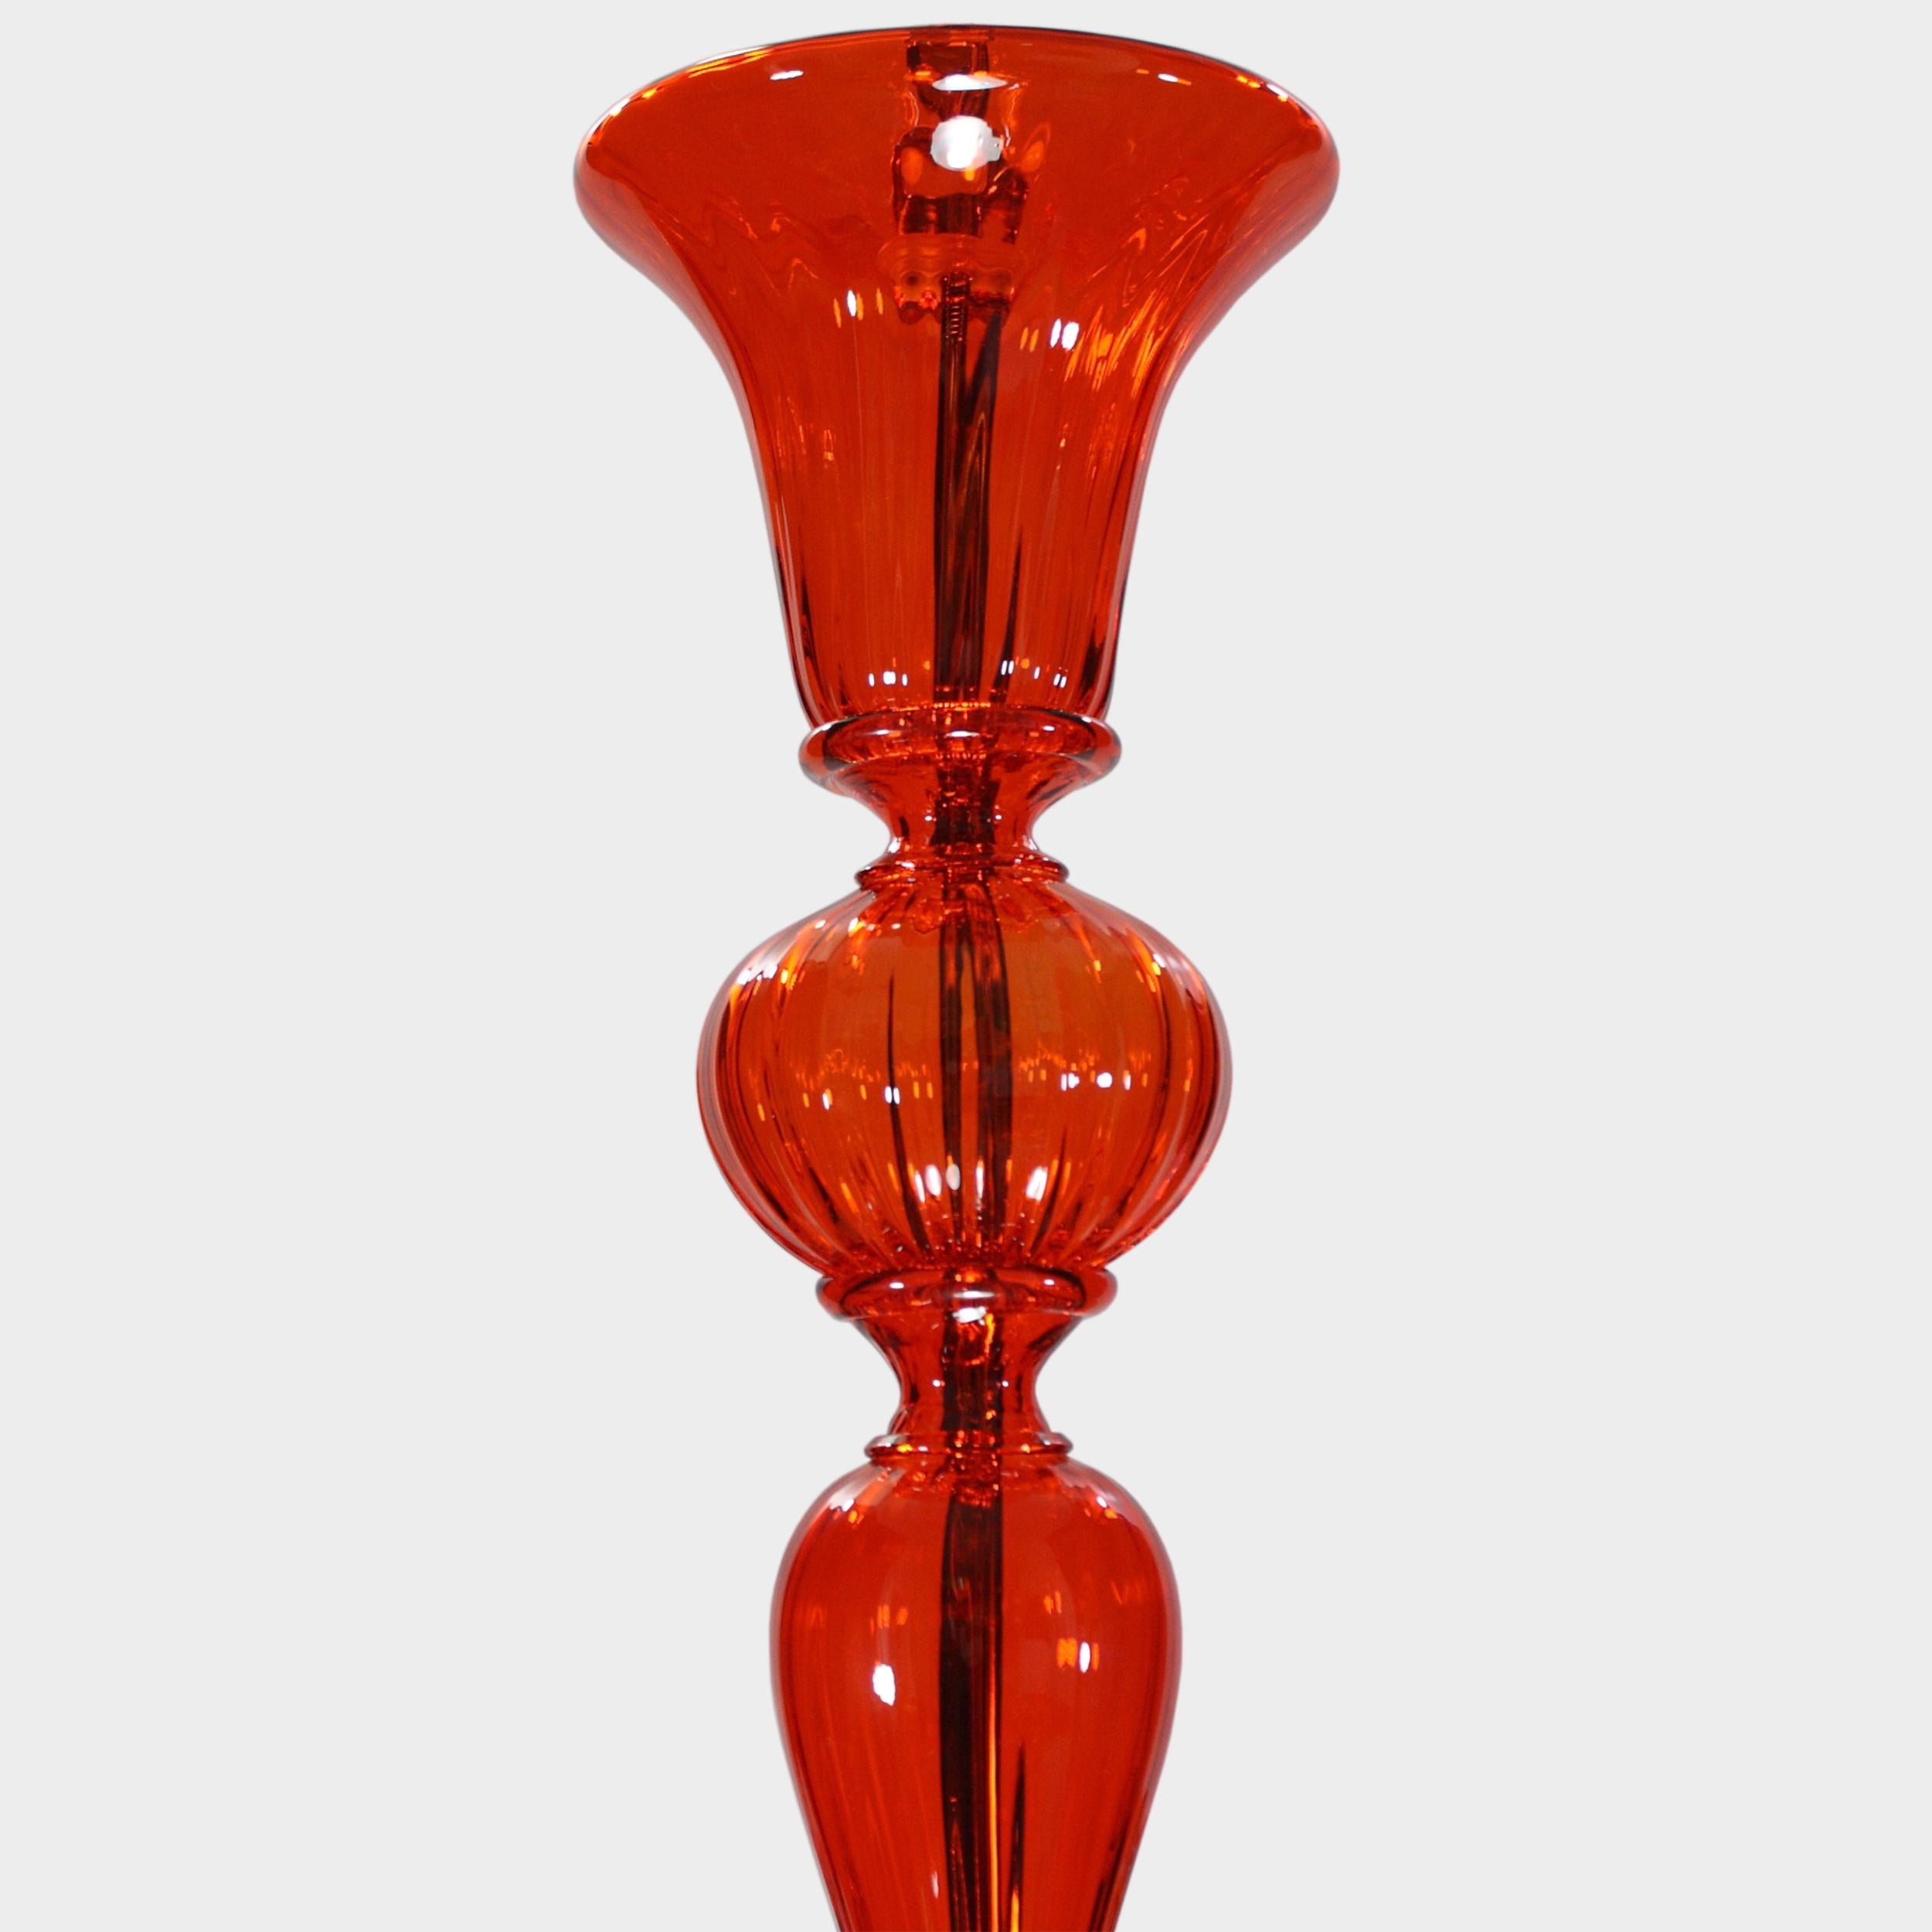 21st Century Chandelier, 6 Arms Orange Murano Glass by Multiforme In New Condition For Sale In Trebaseleghe, IT